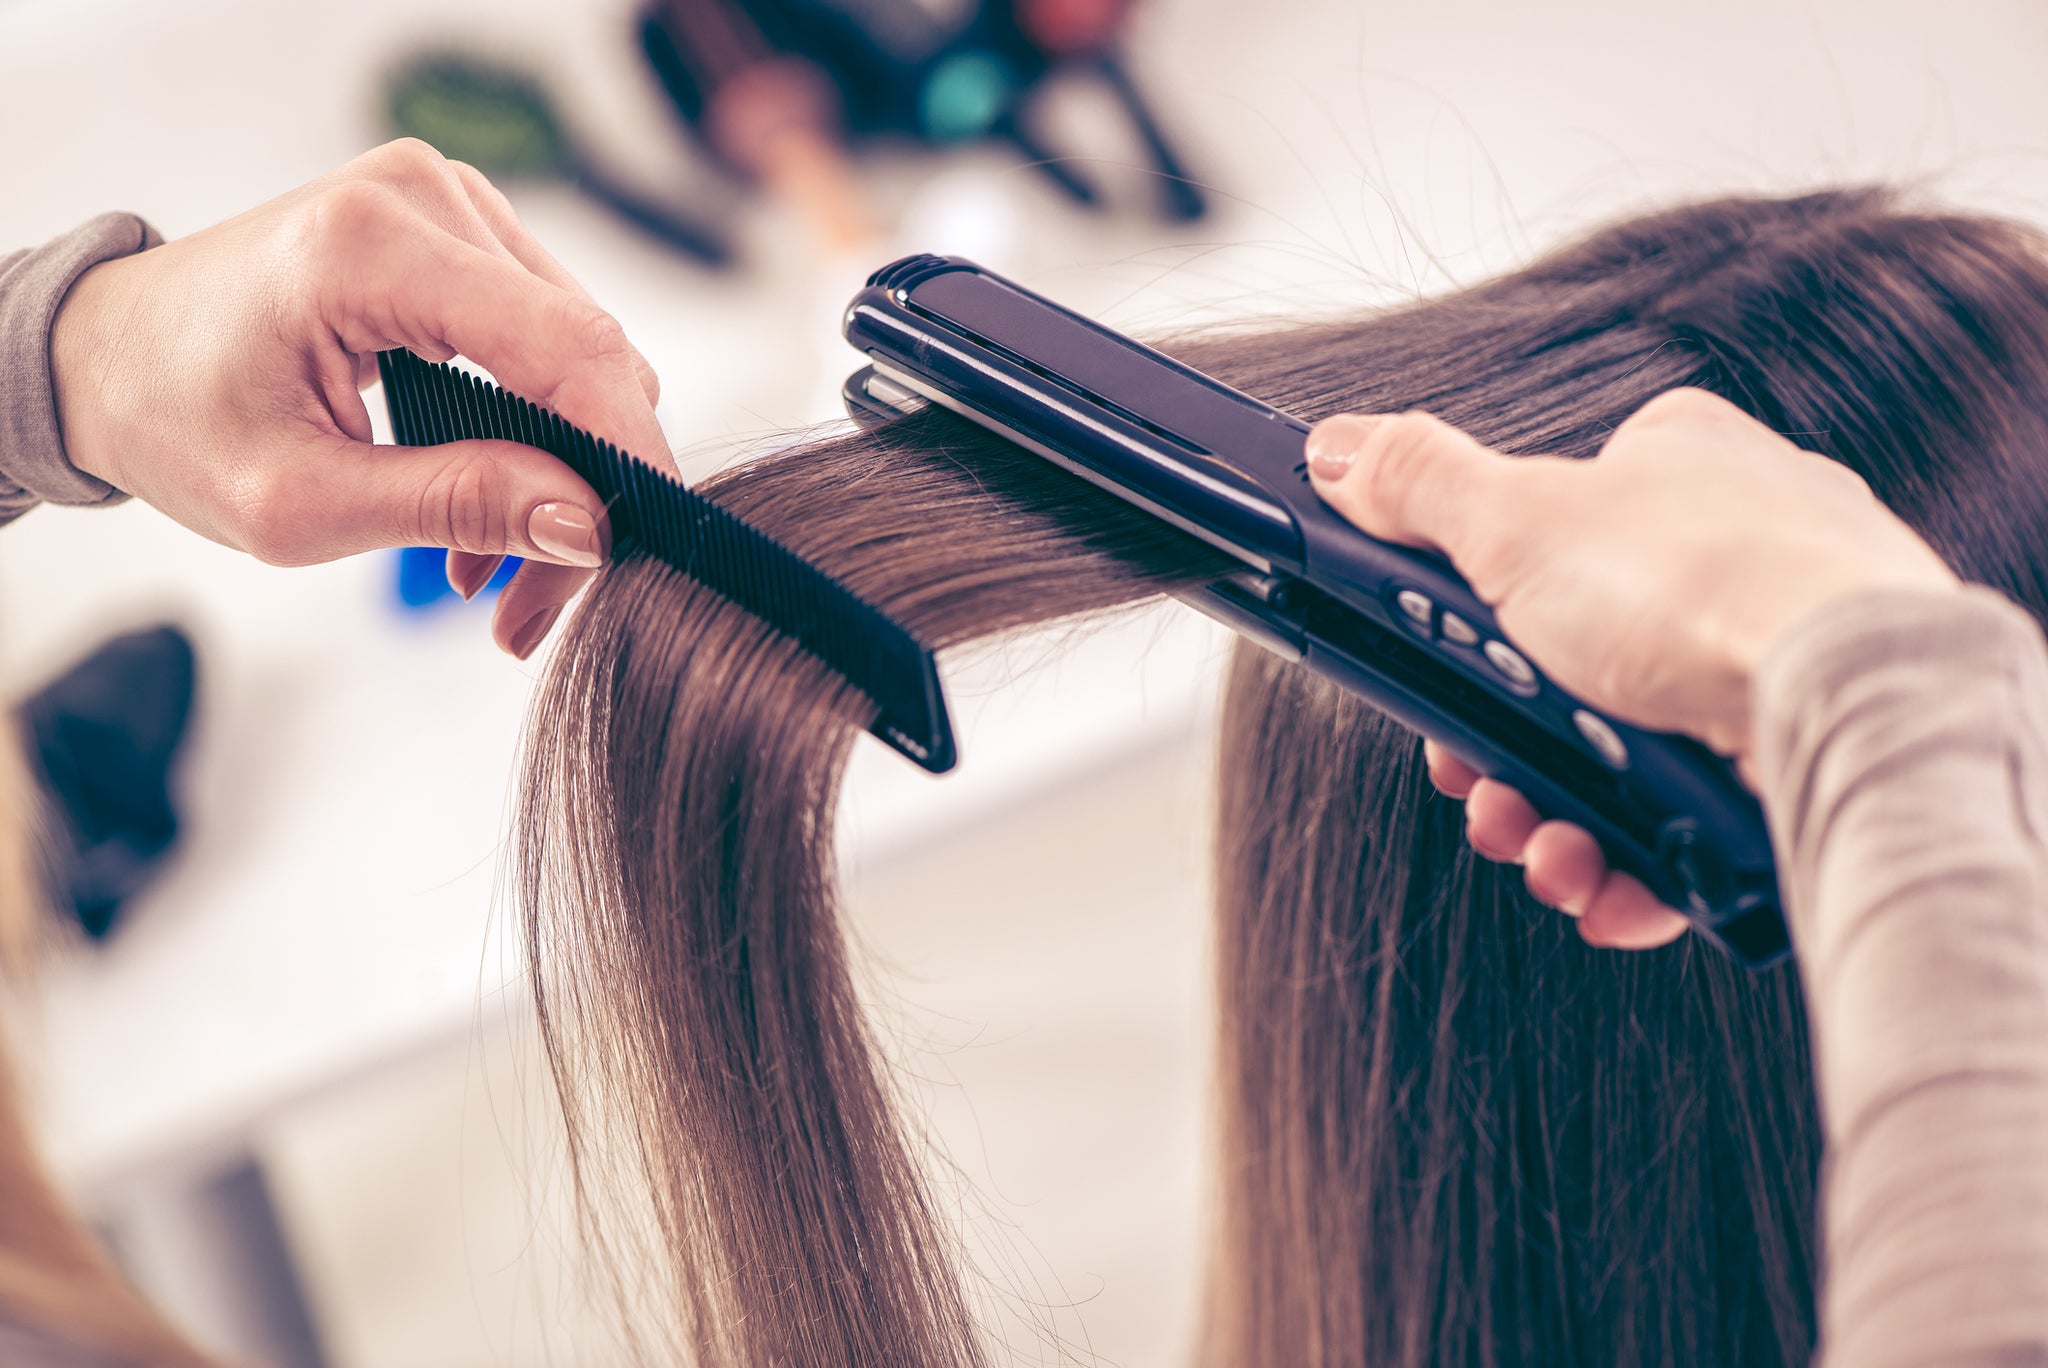 Are Keratin Treatments Bad for You?